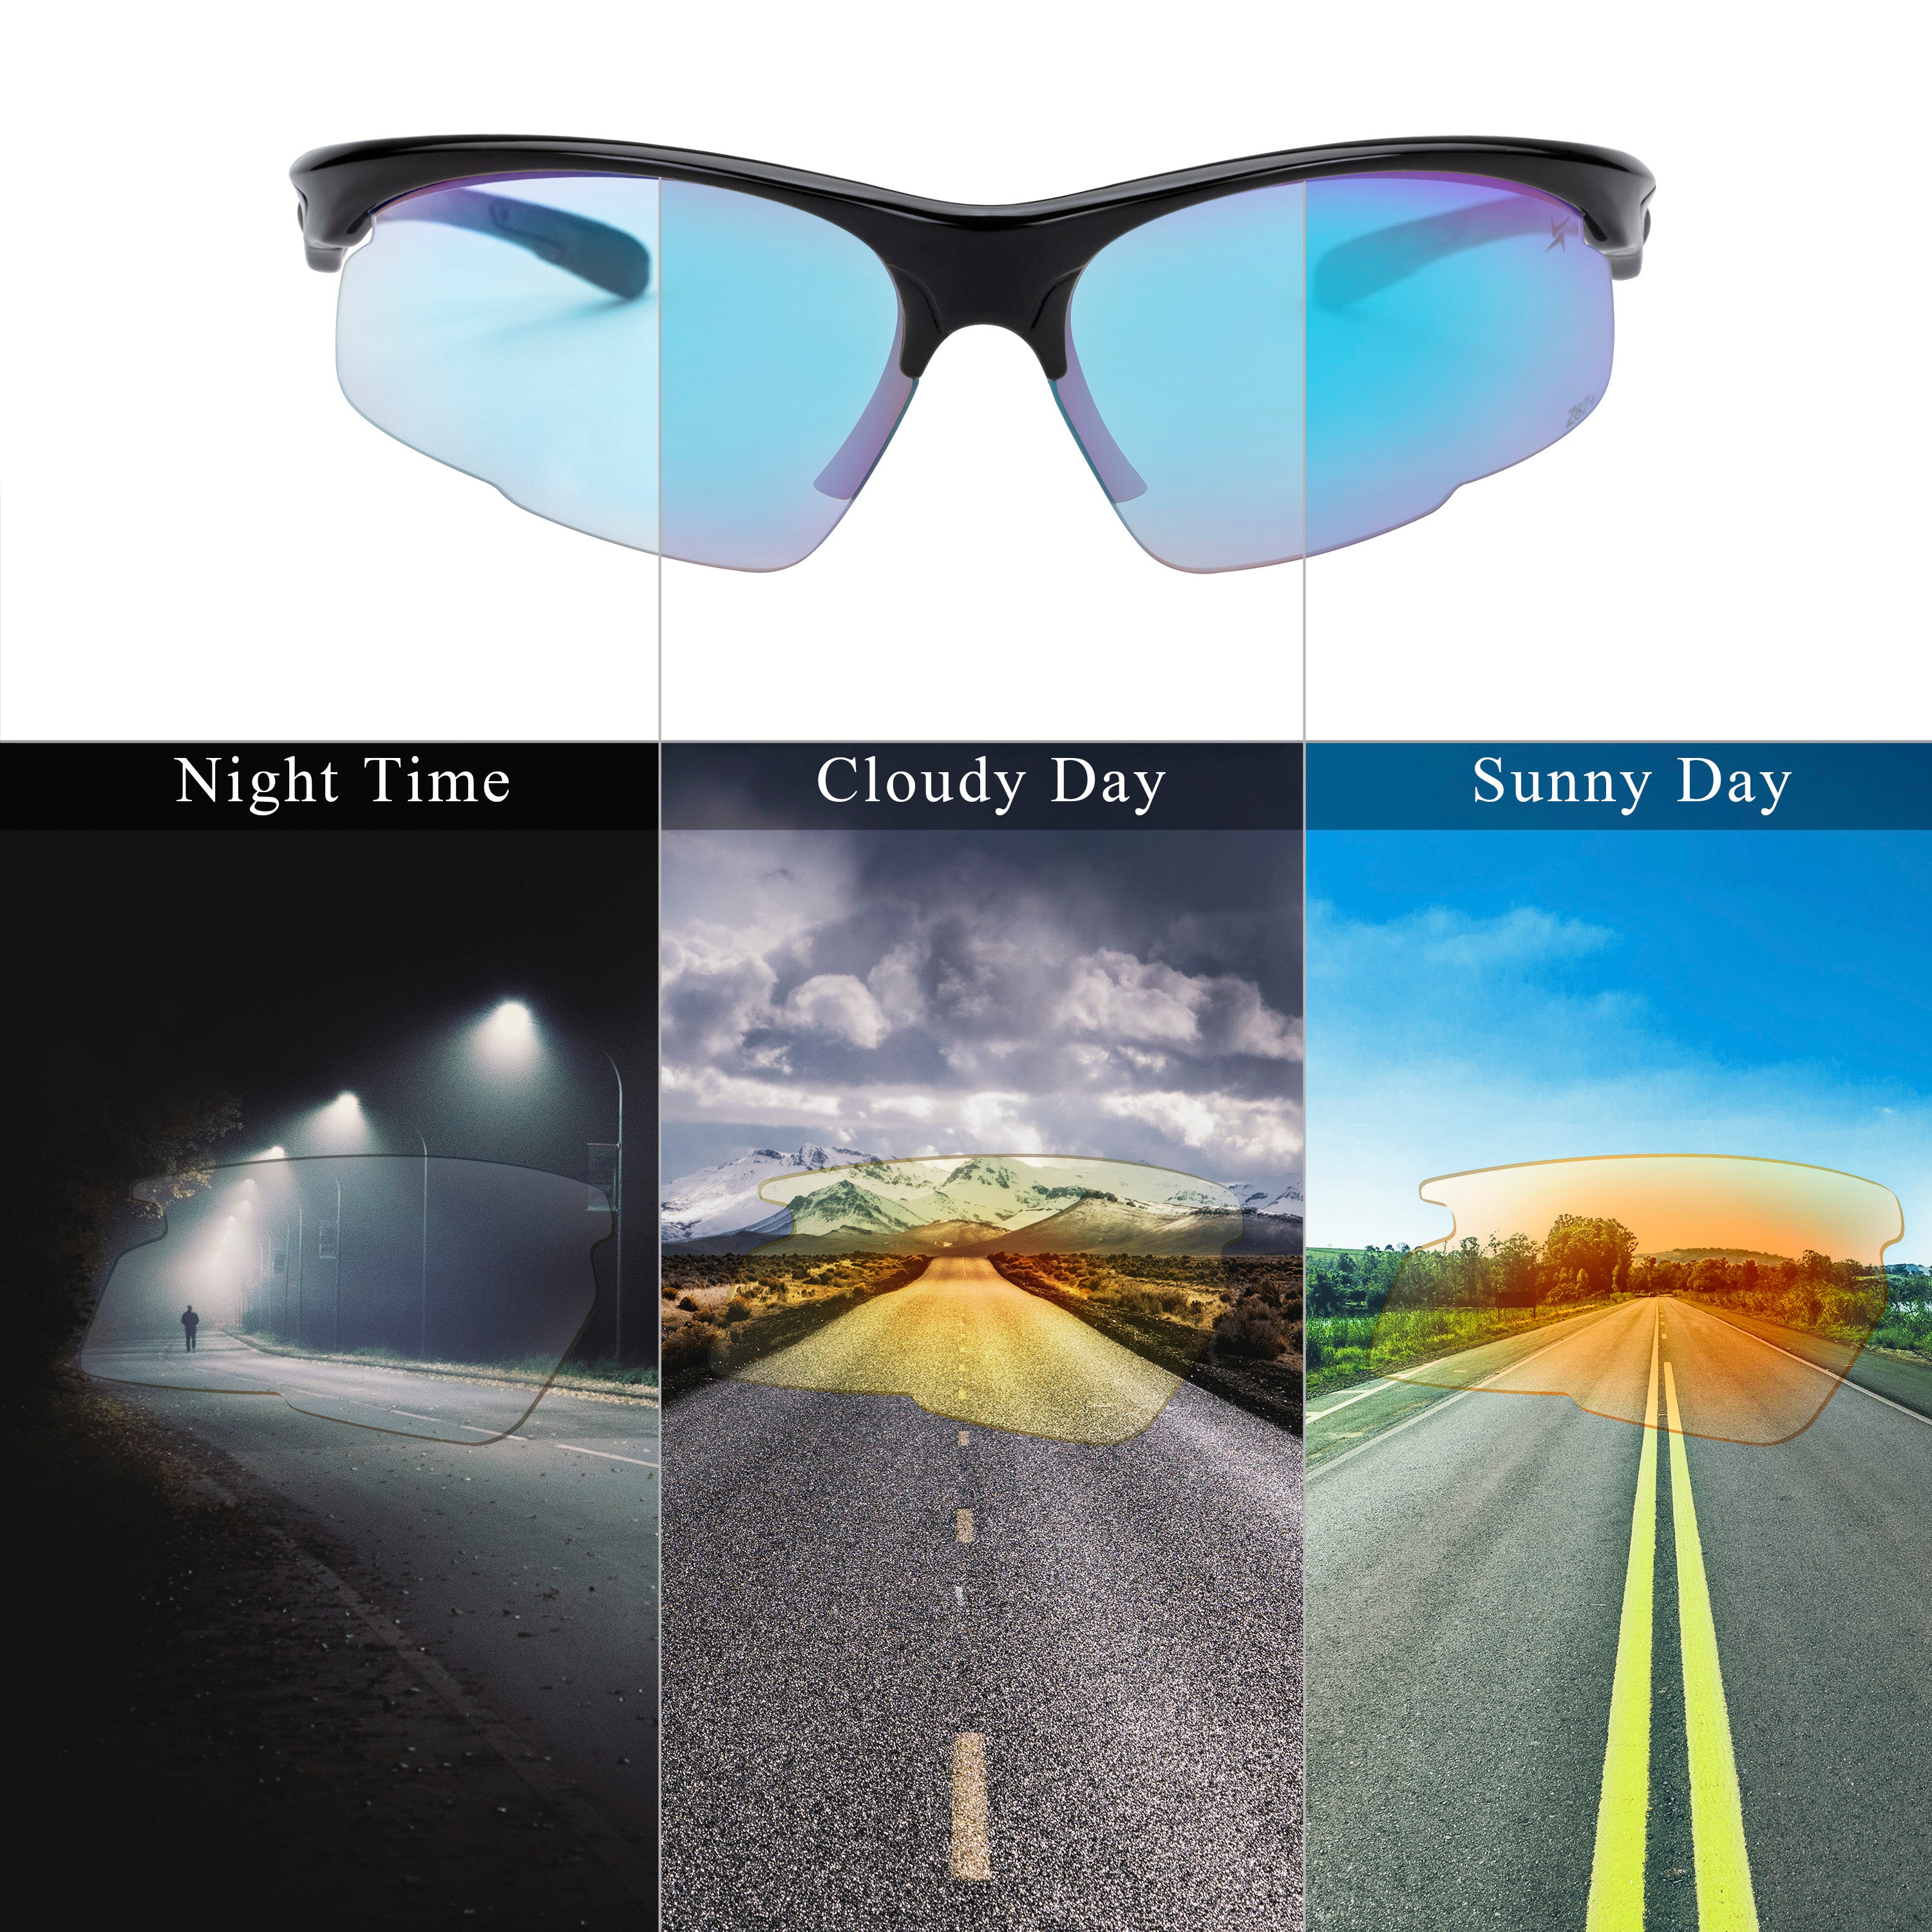 Clear to Grey Photochromic Lens with Blue Mirror Coating Black Half Frame Wrap Around Sport Safety Sunglasses.